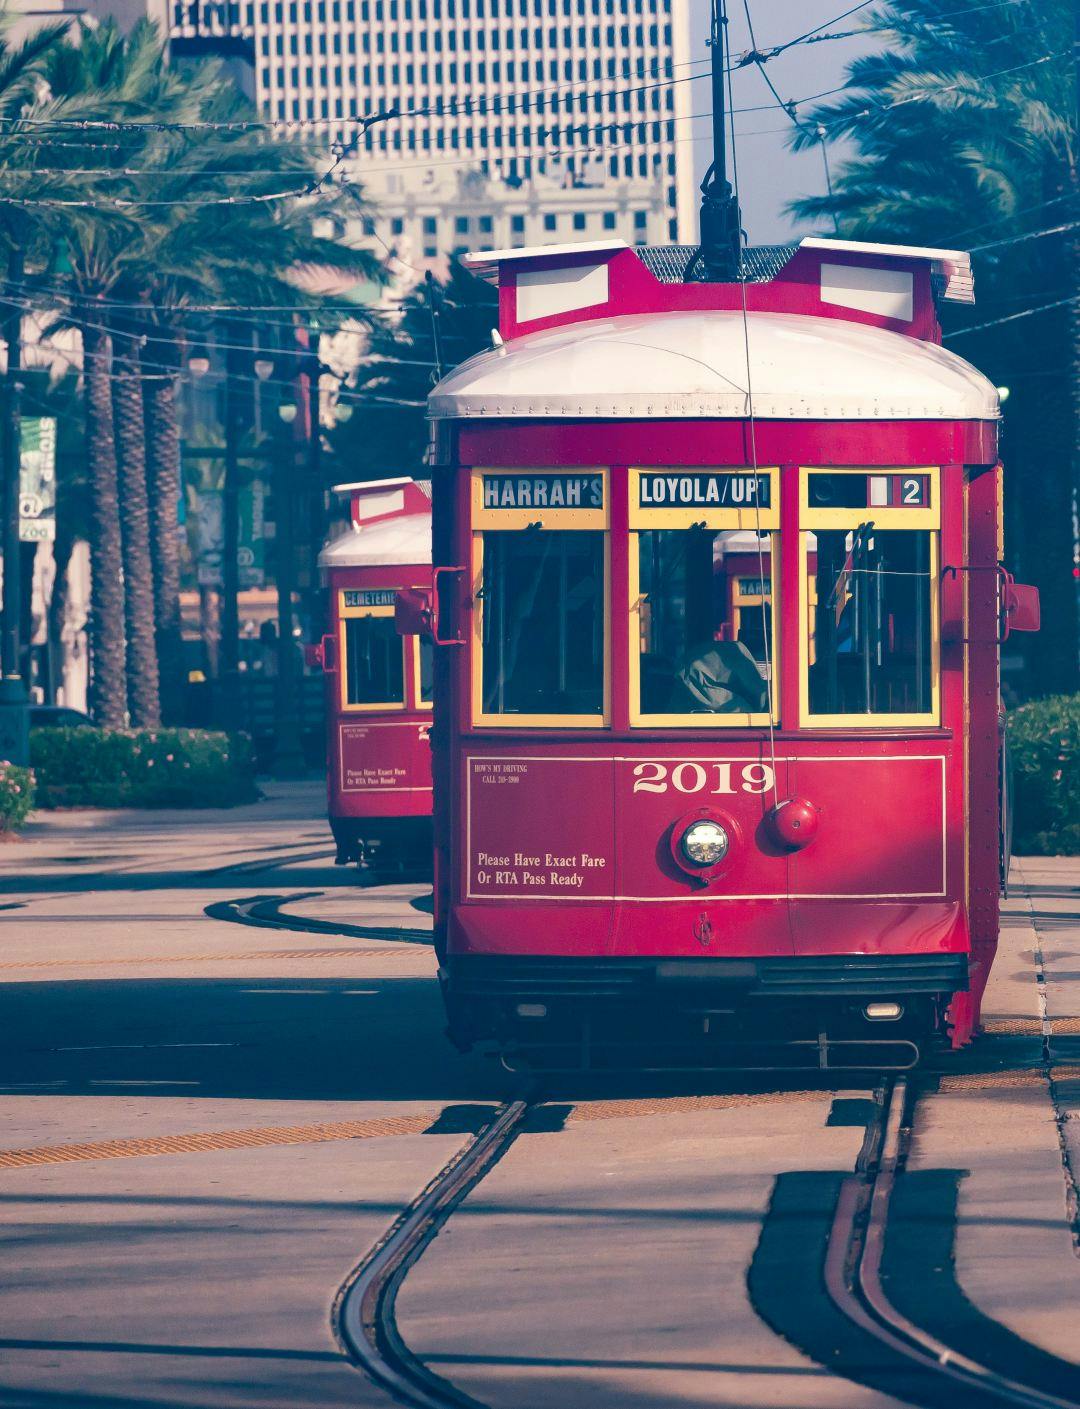 A Trolley in New Orleans